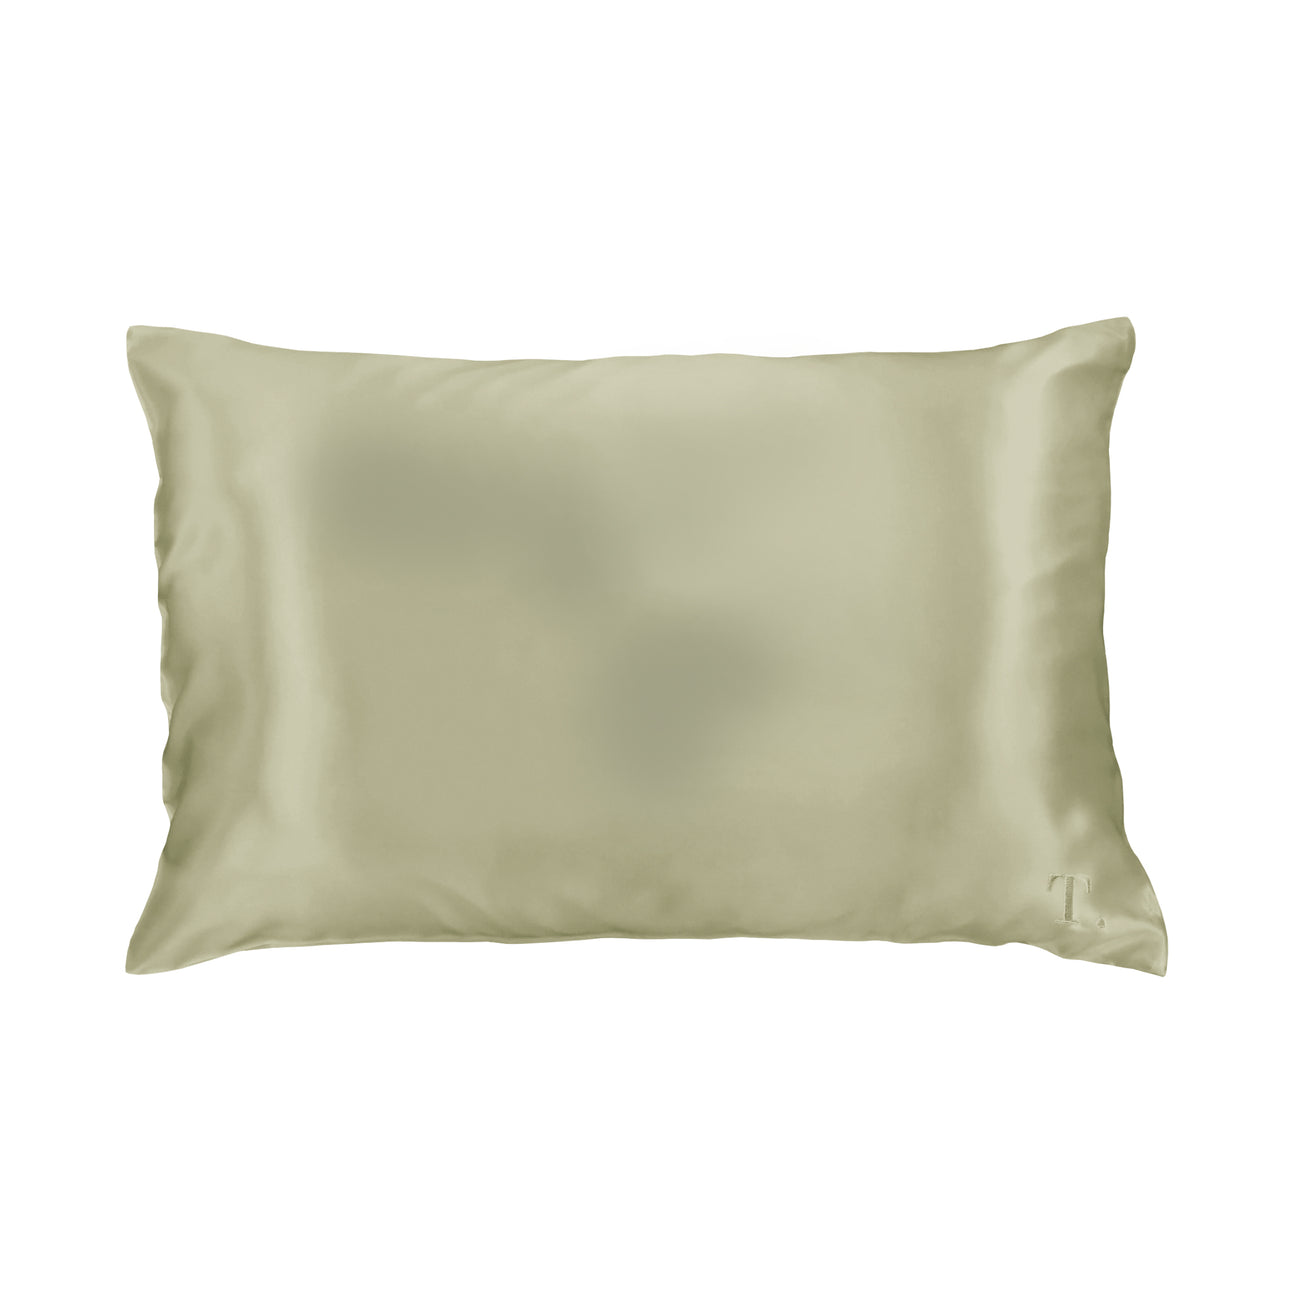 Tender Objects mulberry silk pillowcase in Natural Sage